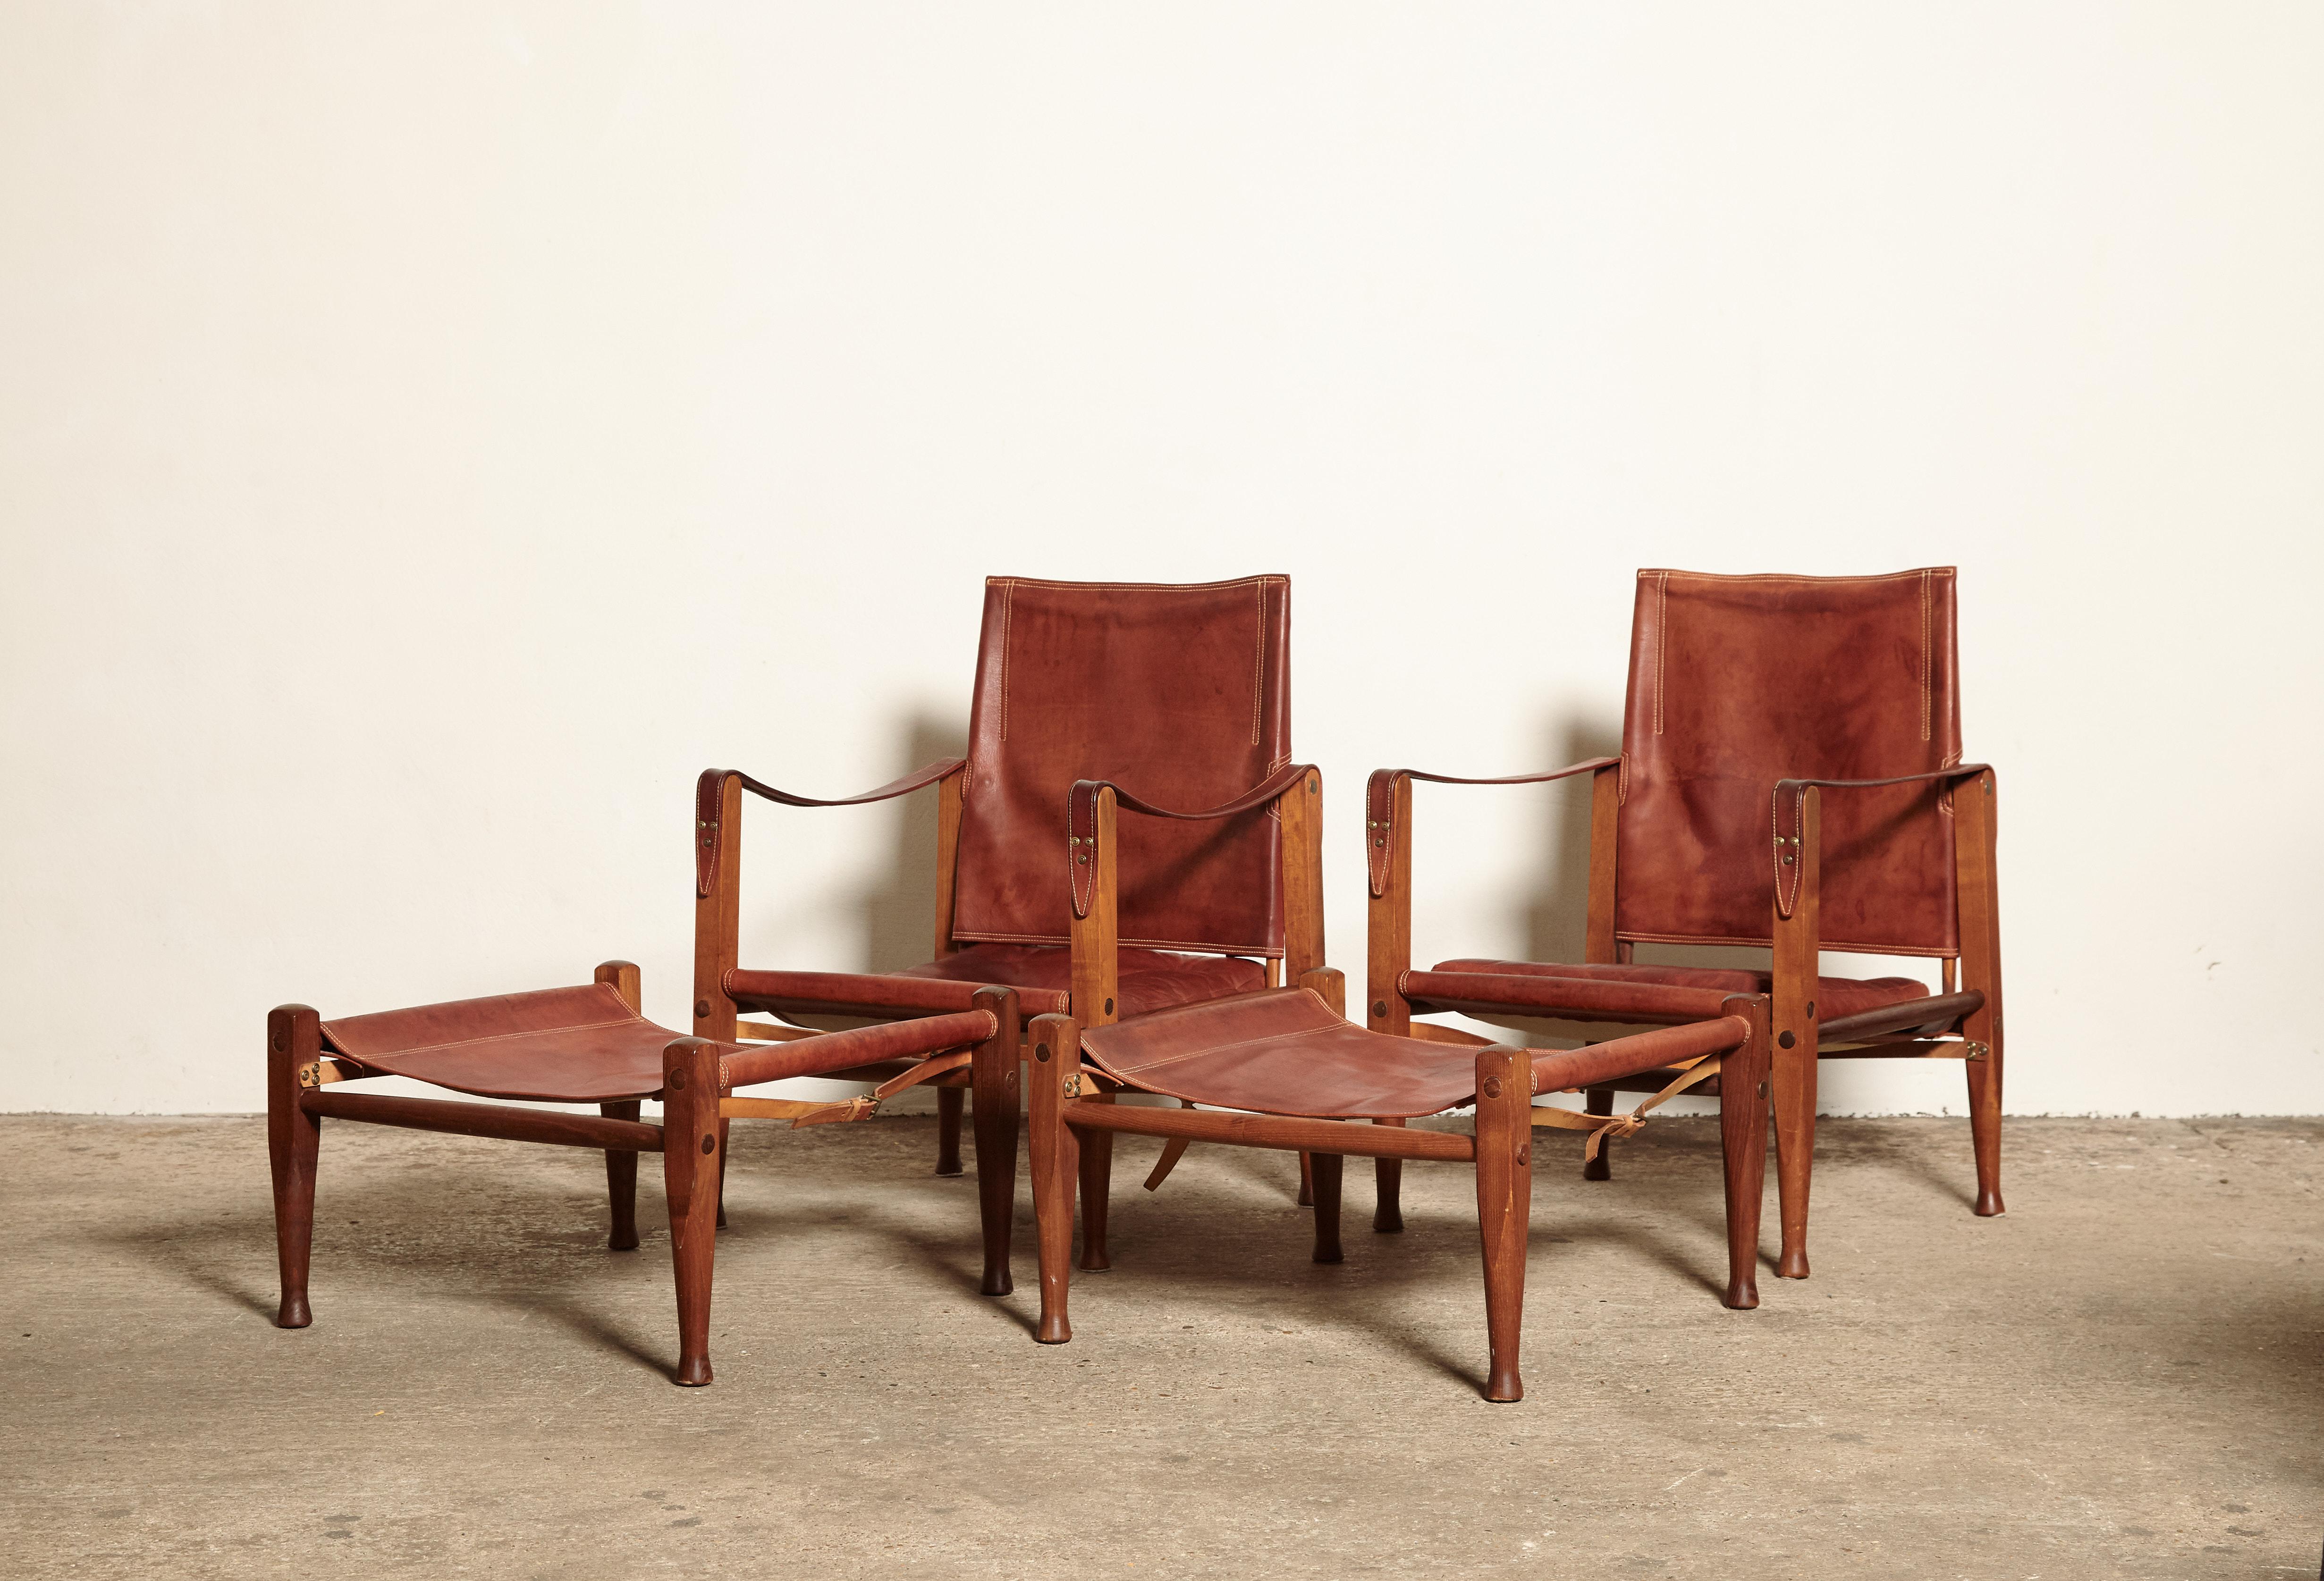 A rare and stunning pair of safari chairs and matching foot stools designed by Kaare Klint. Ashwood frame and beautifully patinated original leather. Designed in 1933 by Kaare Klint for Rud. Rasmussen, Copenhagen, Denmark. Good vintage condition